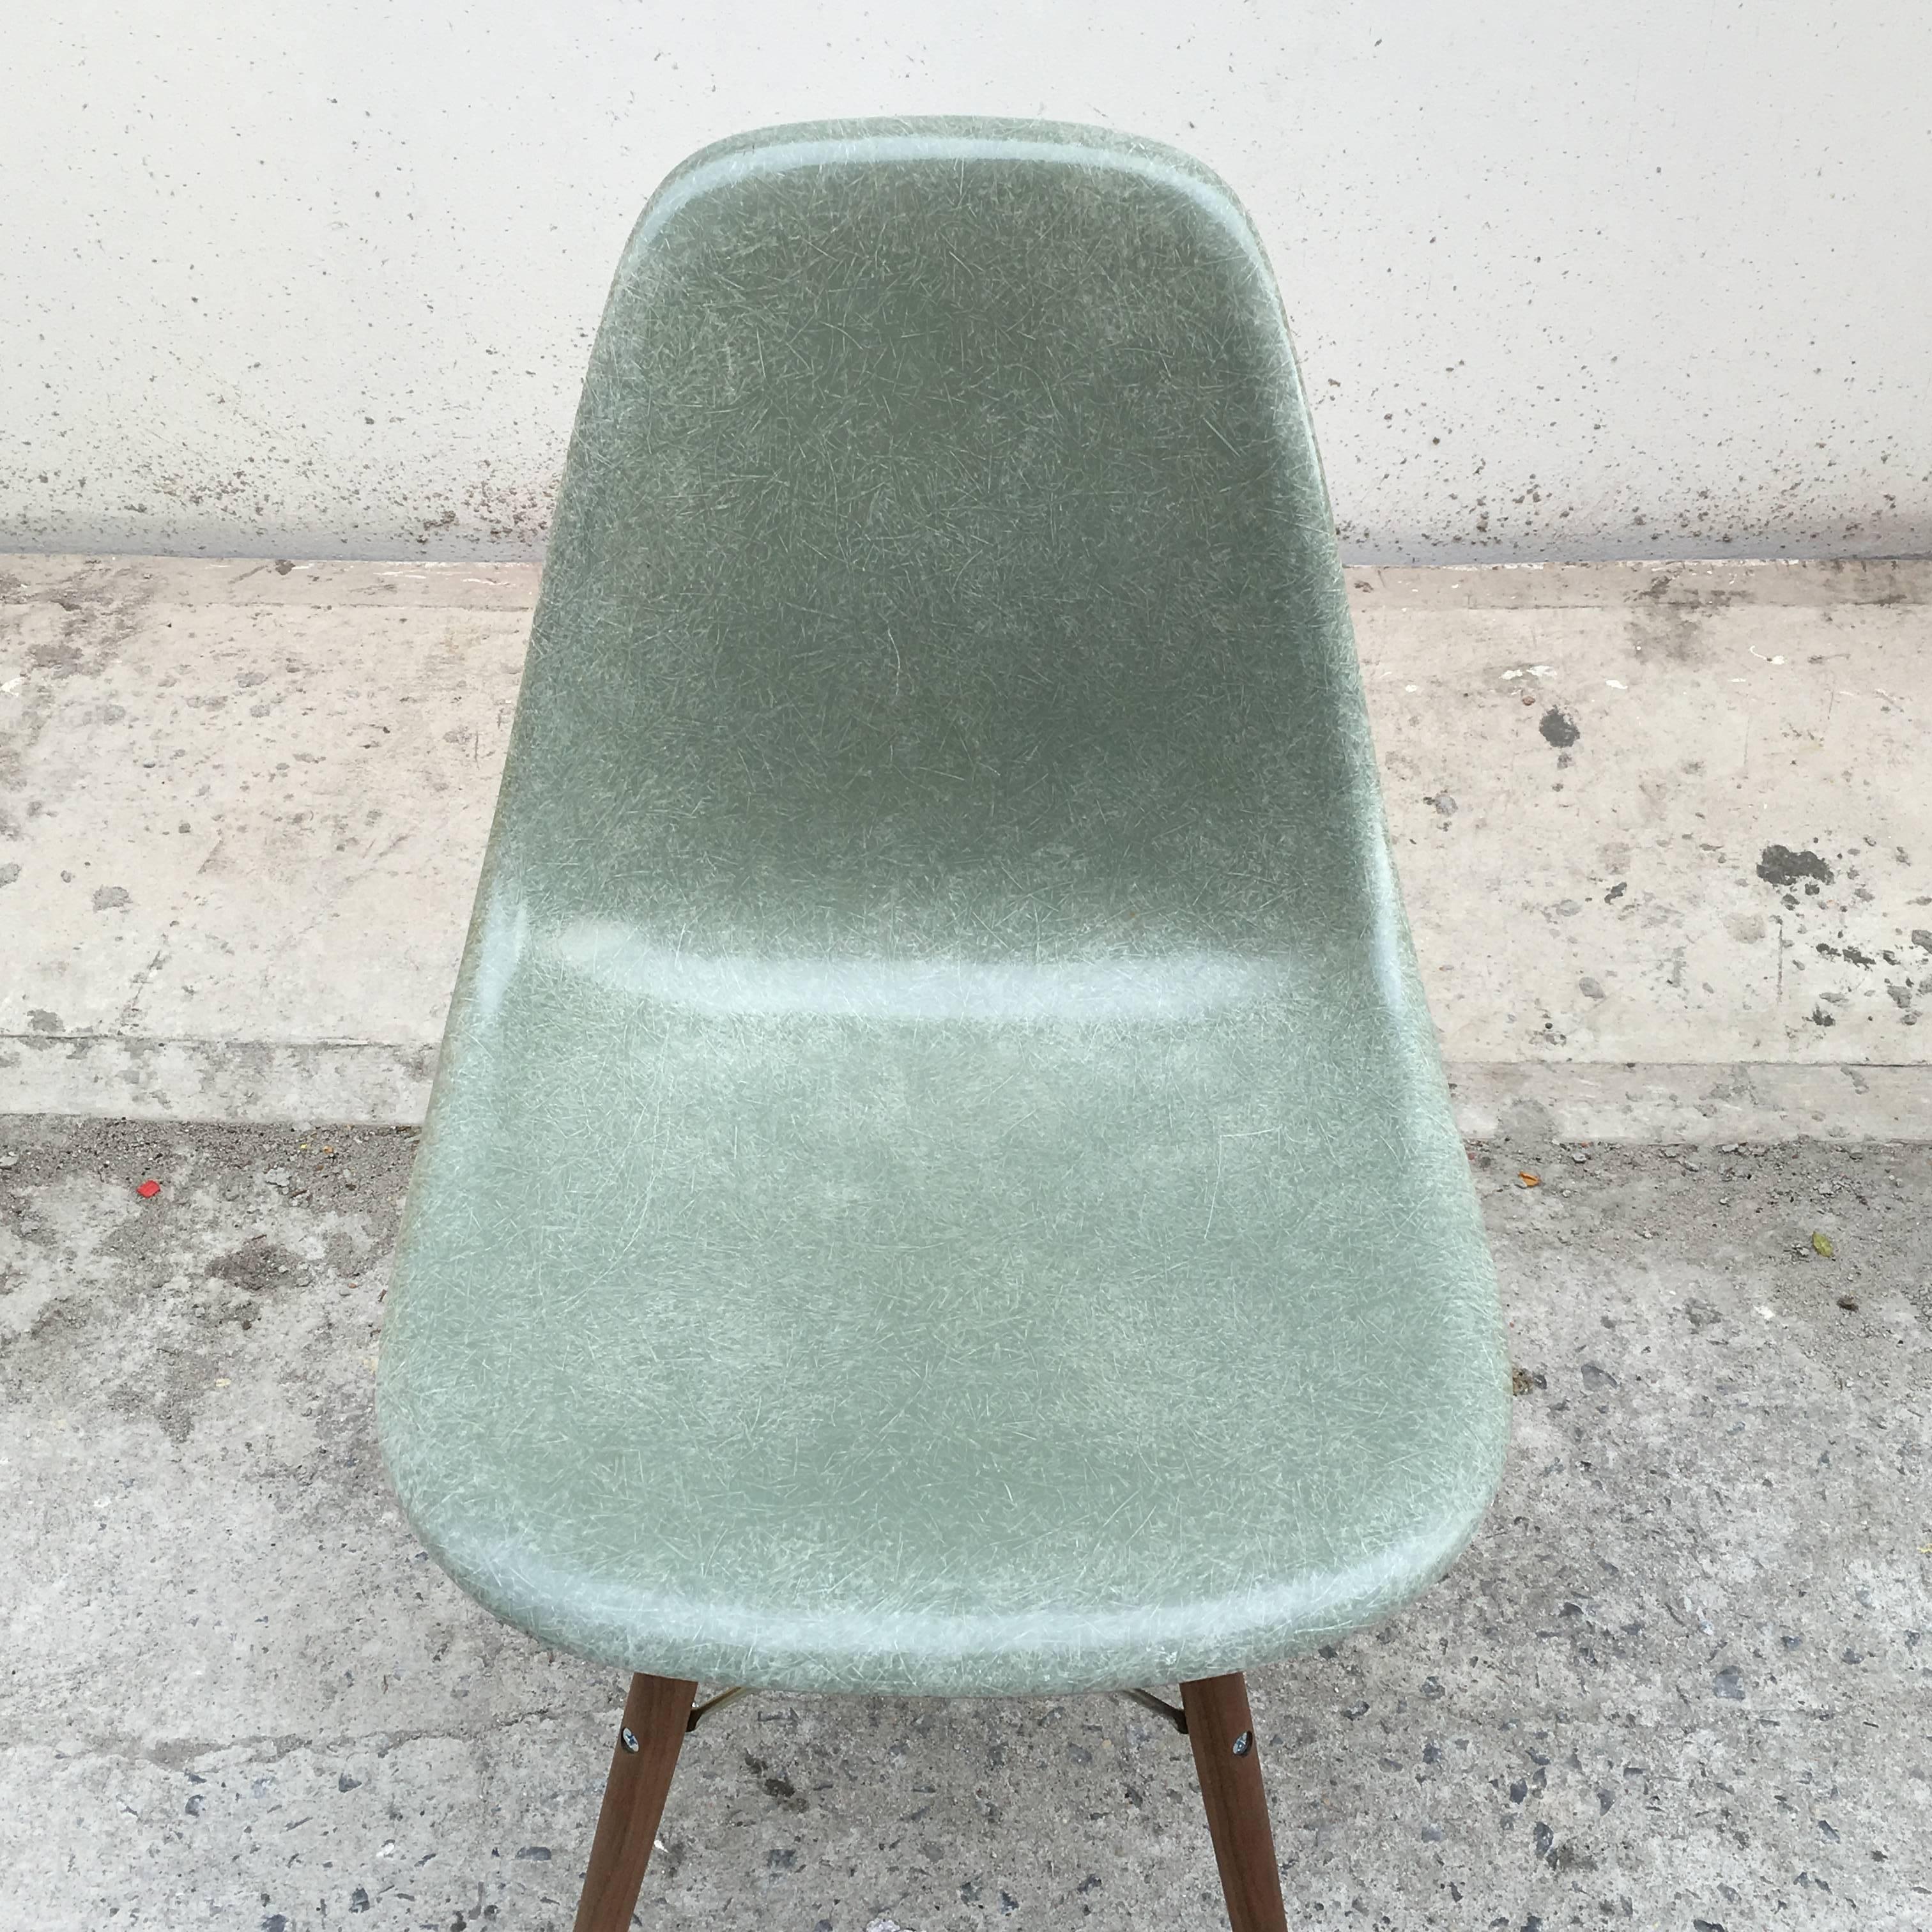 Eight Herman Miller Eames seafoam green dining chairs. In great vintage condition with no cracks or holes. Large sets in this color are hard to source. The bases are from modern conscience and feature zinc coated steel rods and walnut dowel legs.